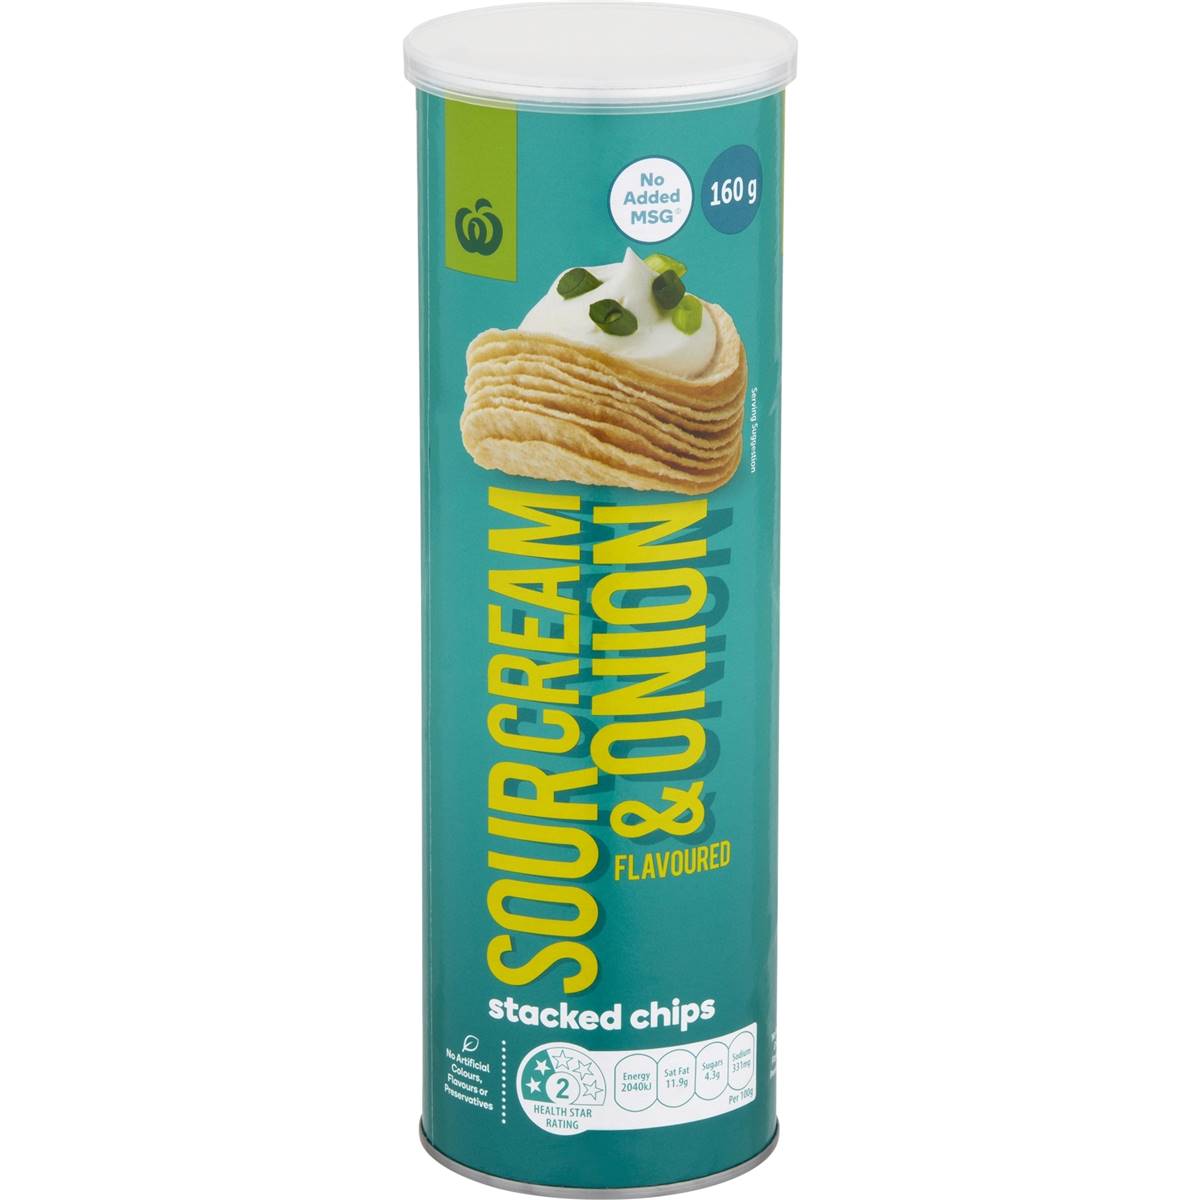 Calories in Woolworths Sour Cream & Onion Stacked Chips